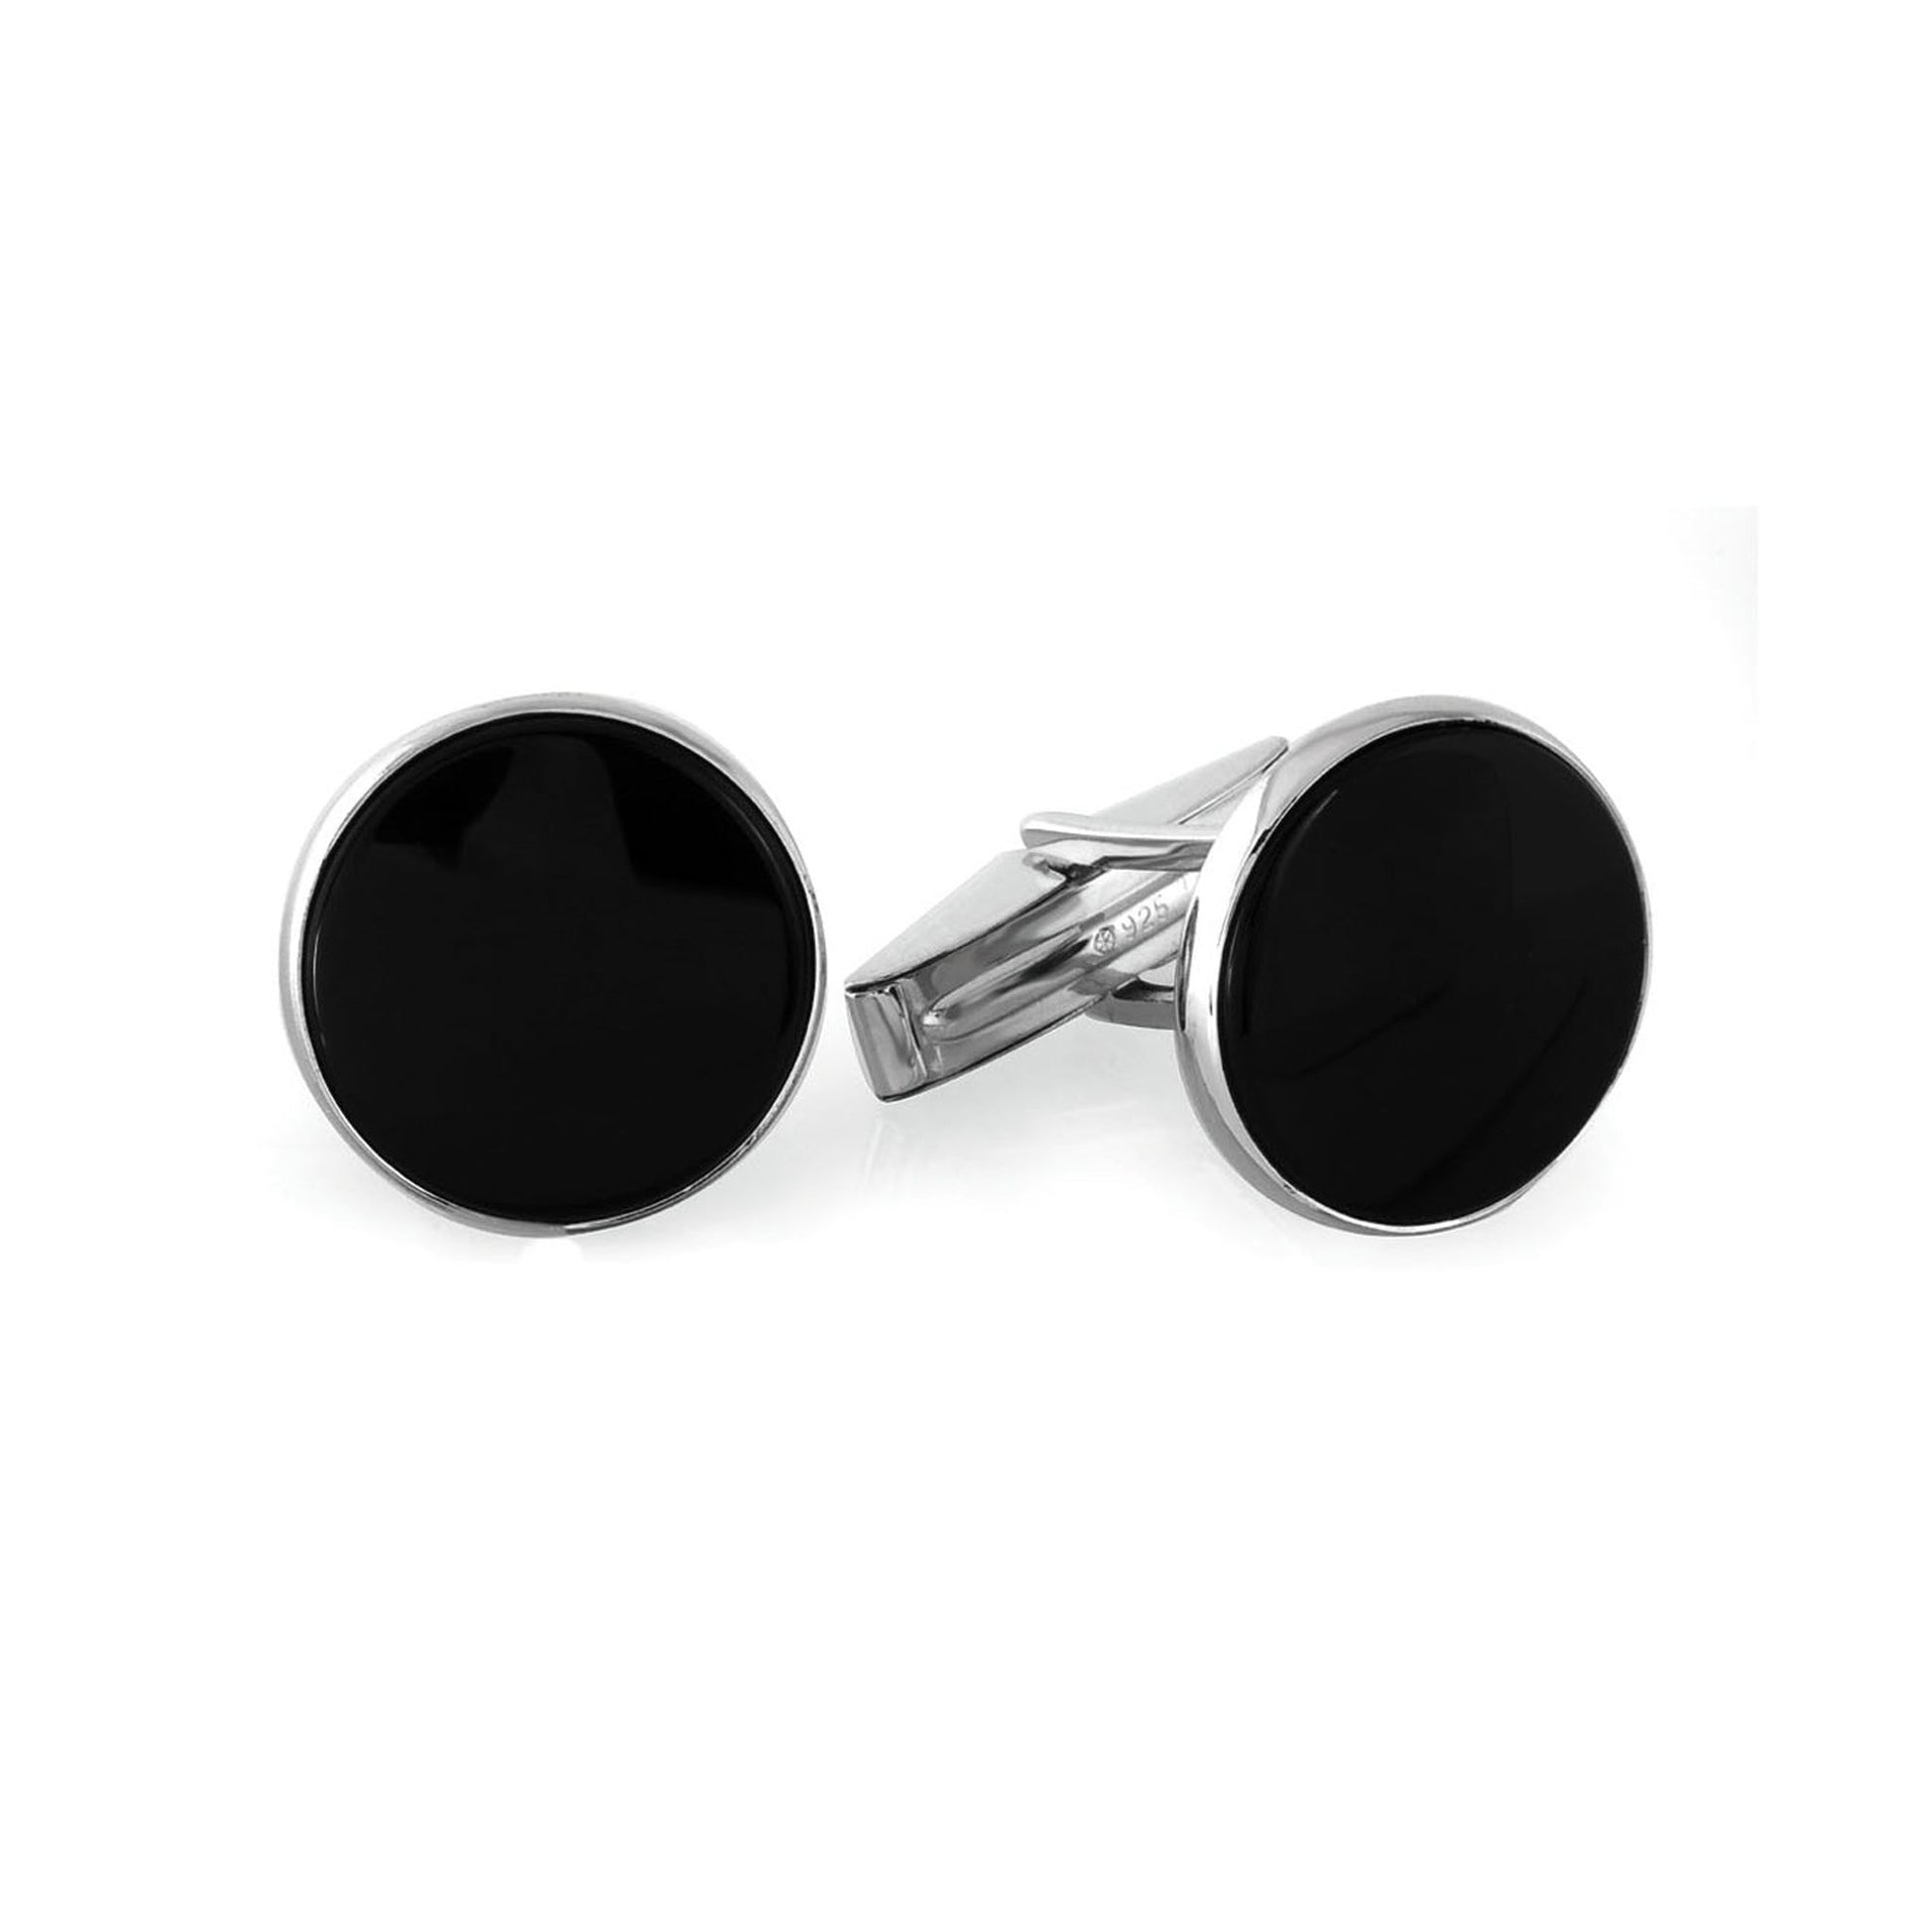 A sterling silver round cufflinks with onyx stones displayed on a neutral white background.